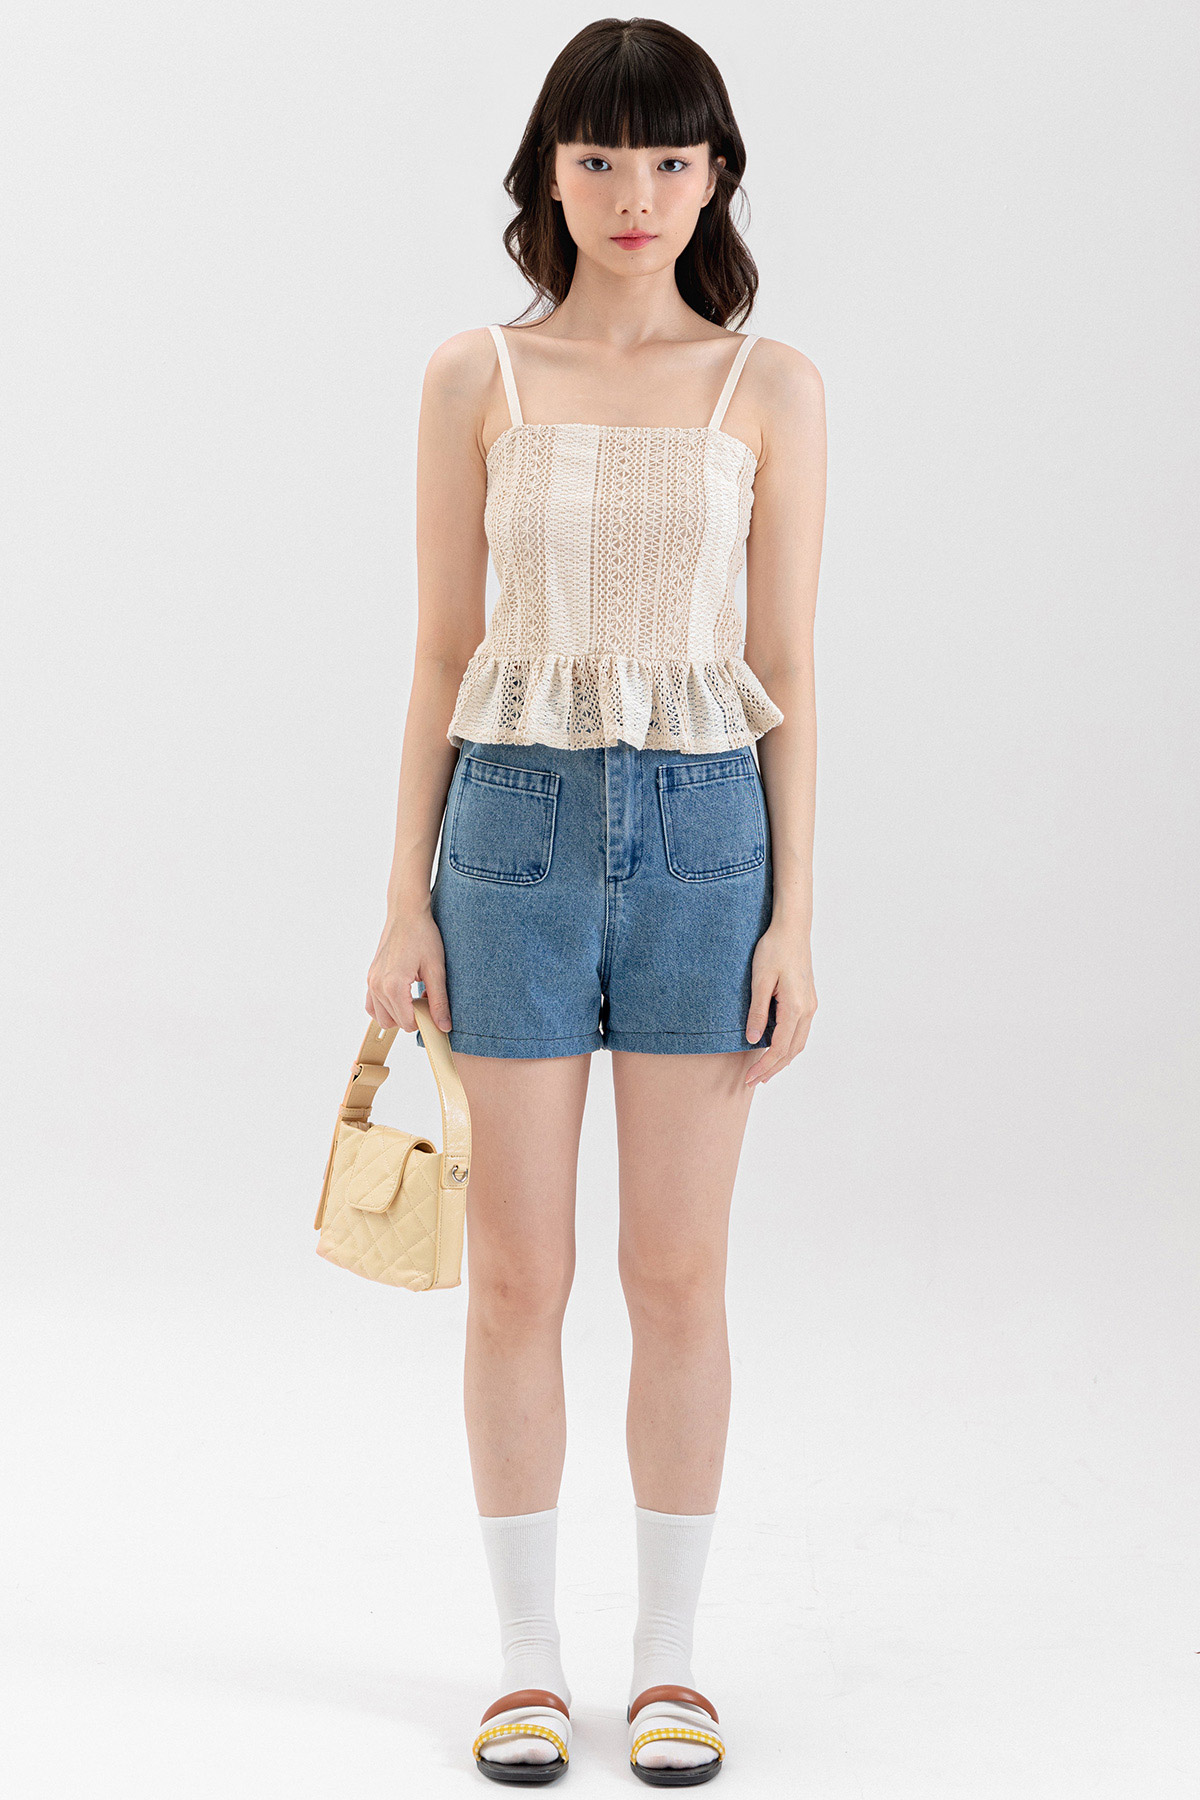 PIA TOP - WINDSOR CREAM [BY MODPARADE]